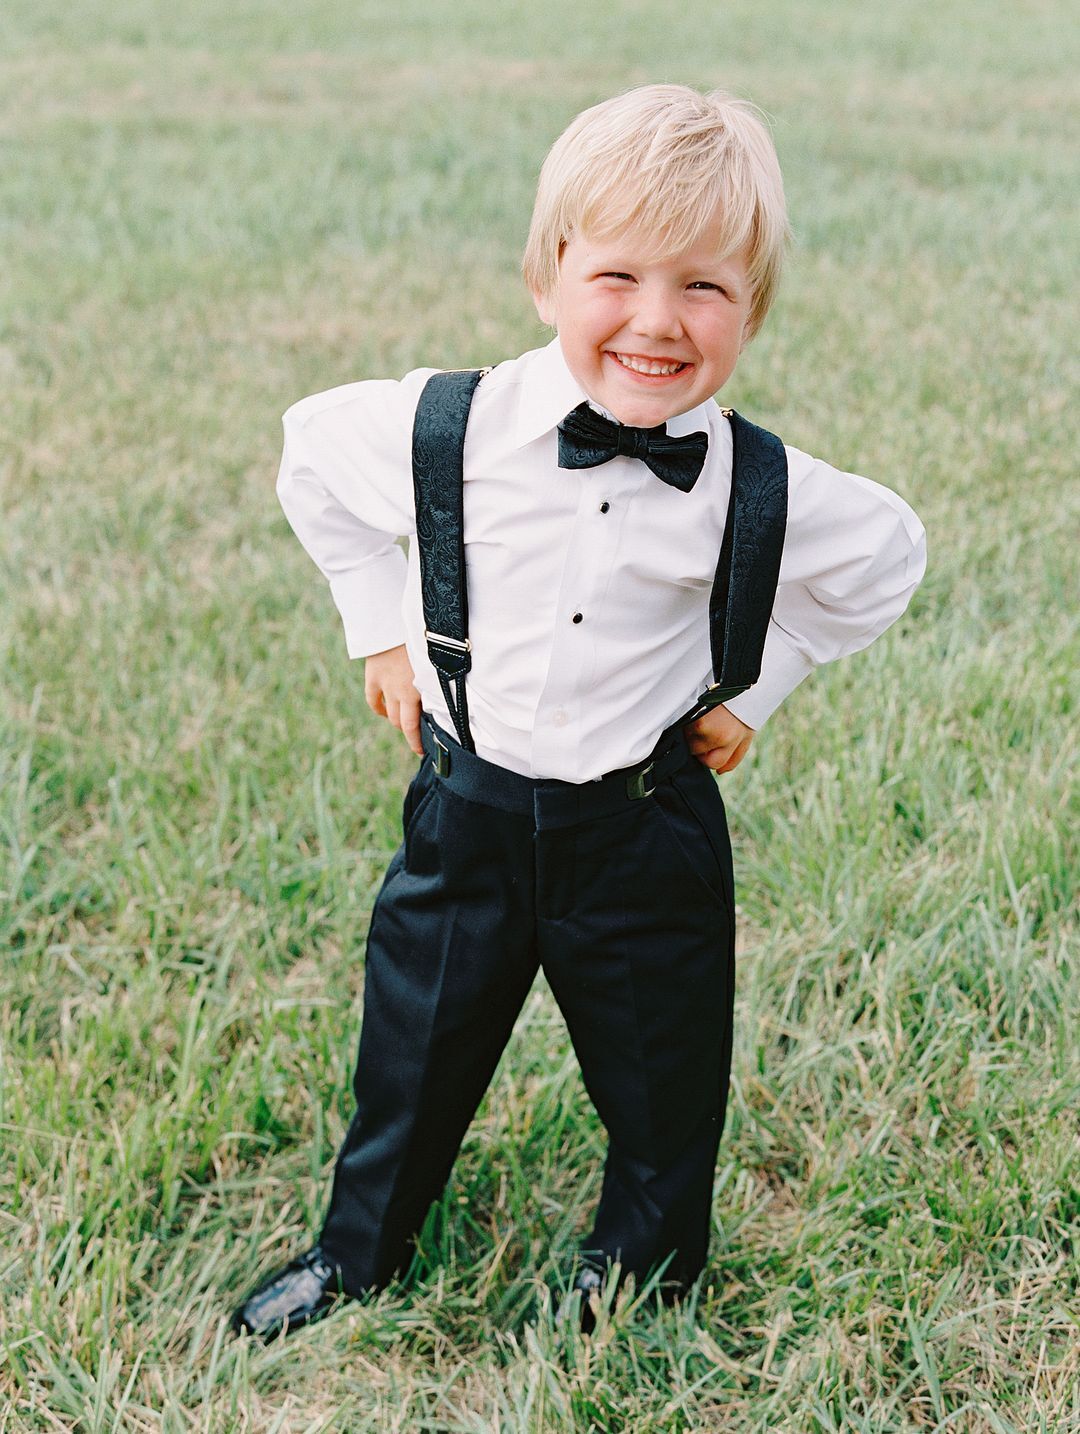 Ring Bearer in Suspenders and Black Bow Tie